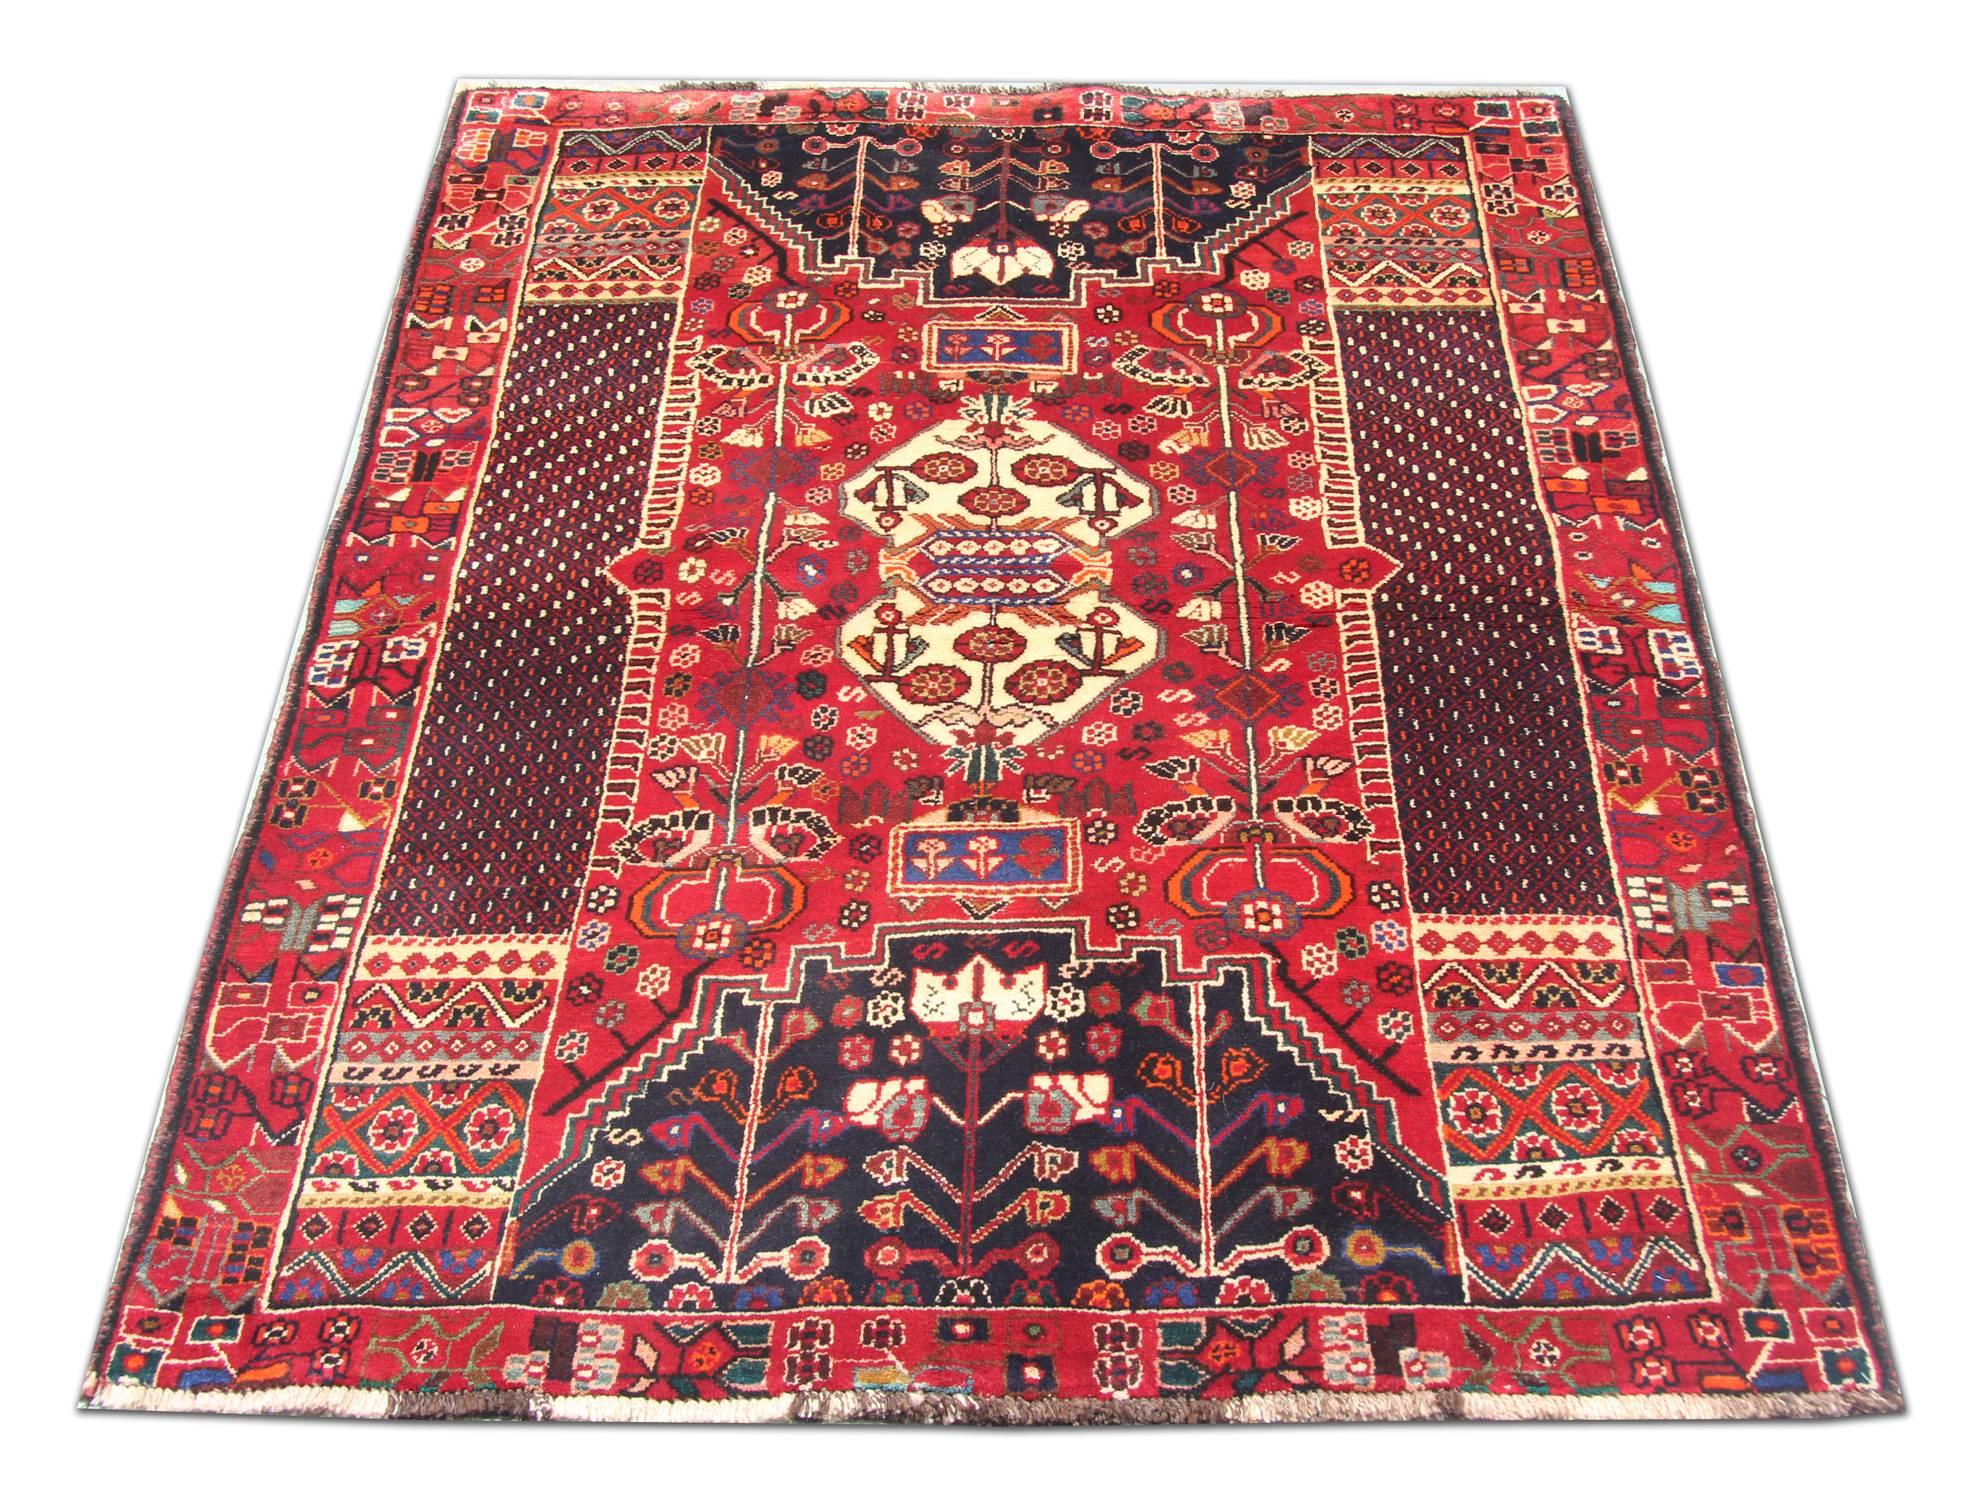 This beautiful wool rug features a fantastic symmetrical tribal design. They are woven in accents of blue and cream on a red field. This rug is adorned with highly-detailed motifs and medallions and is sure to uplift any carpeted tiles or hardwood